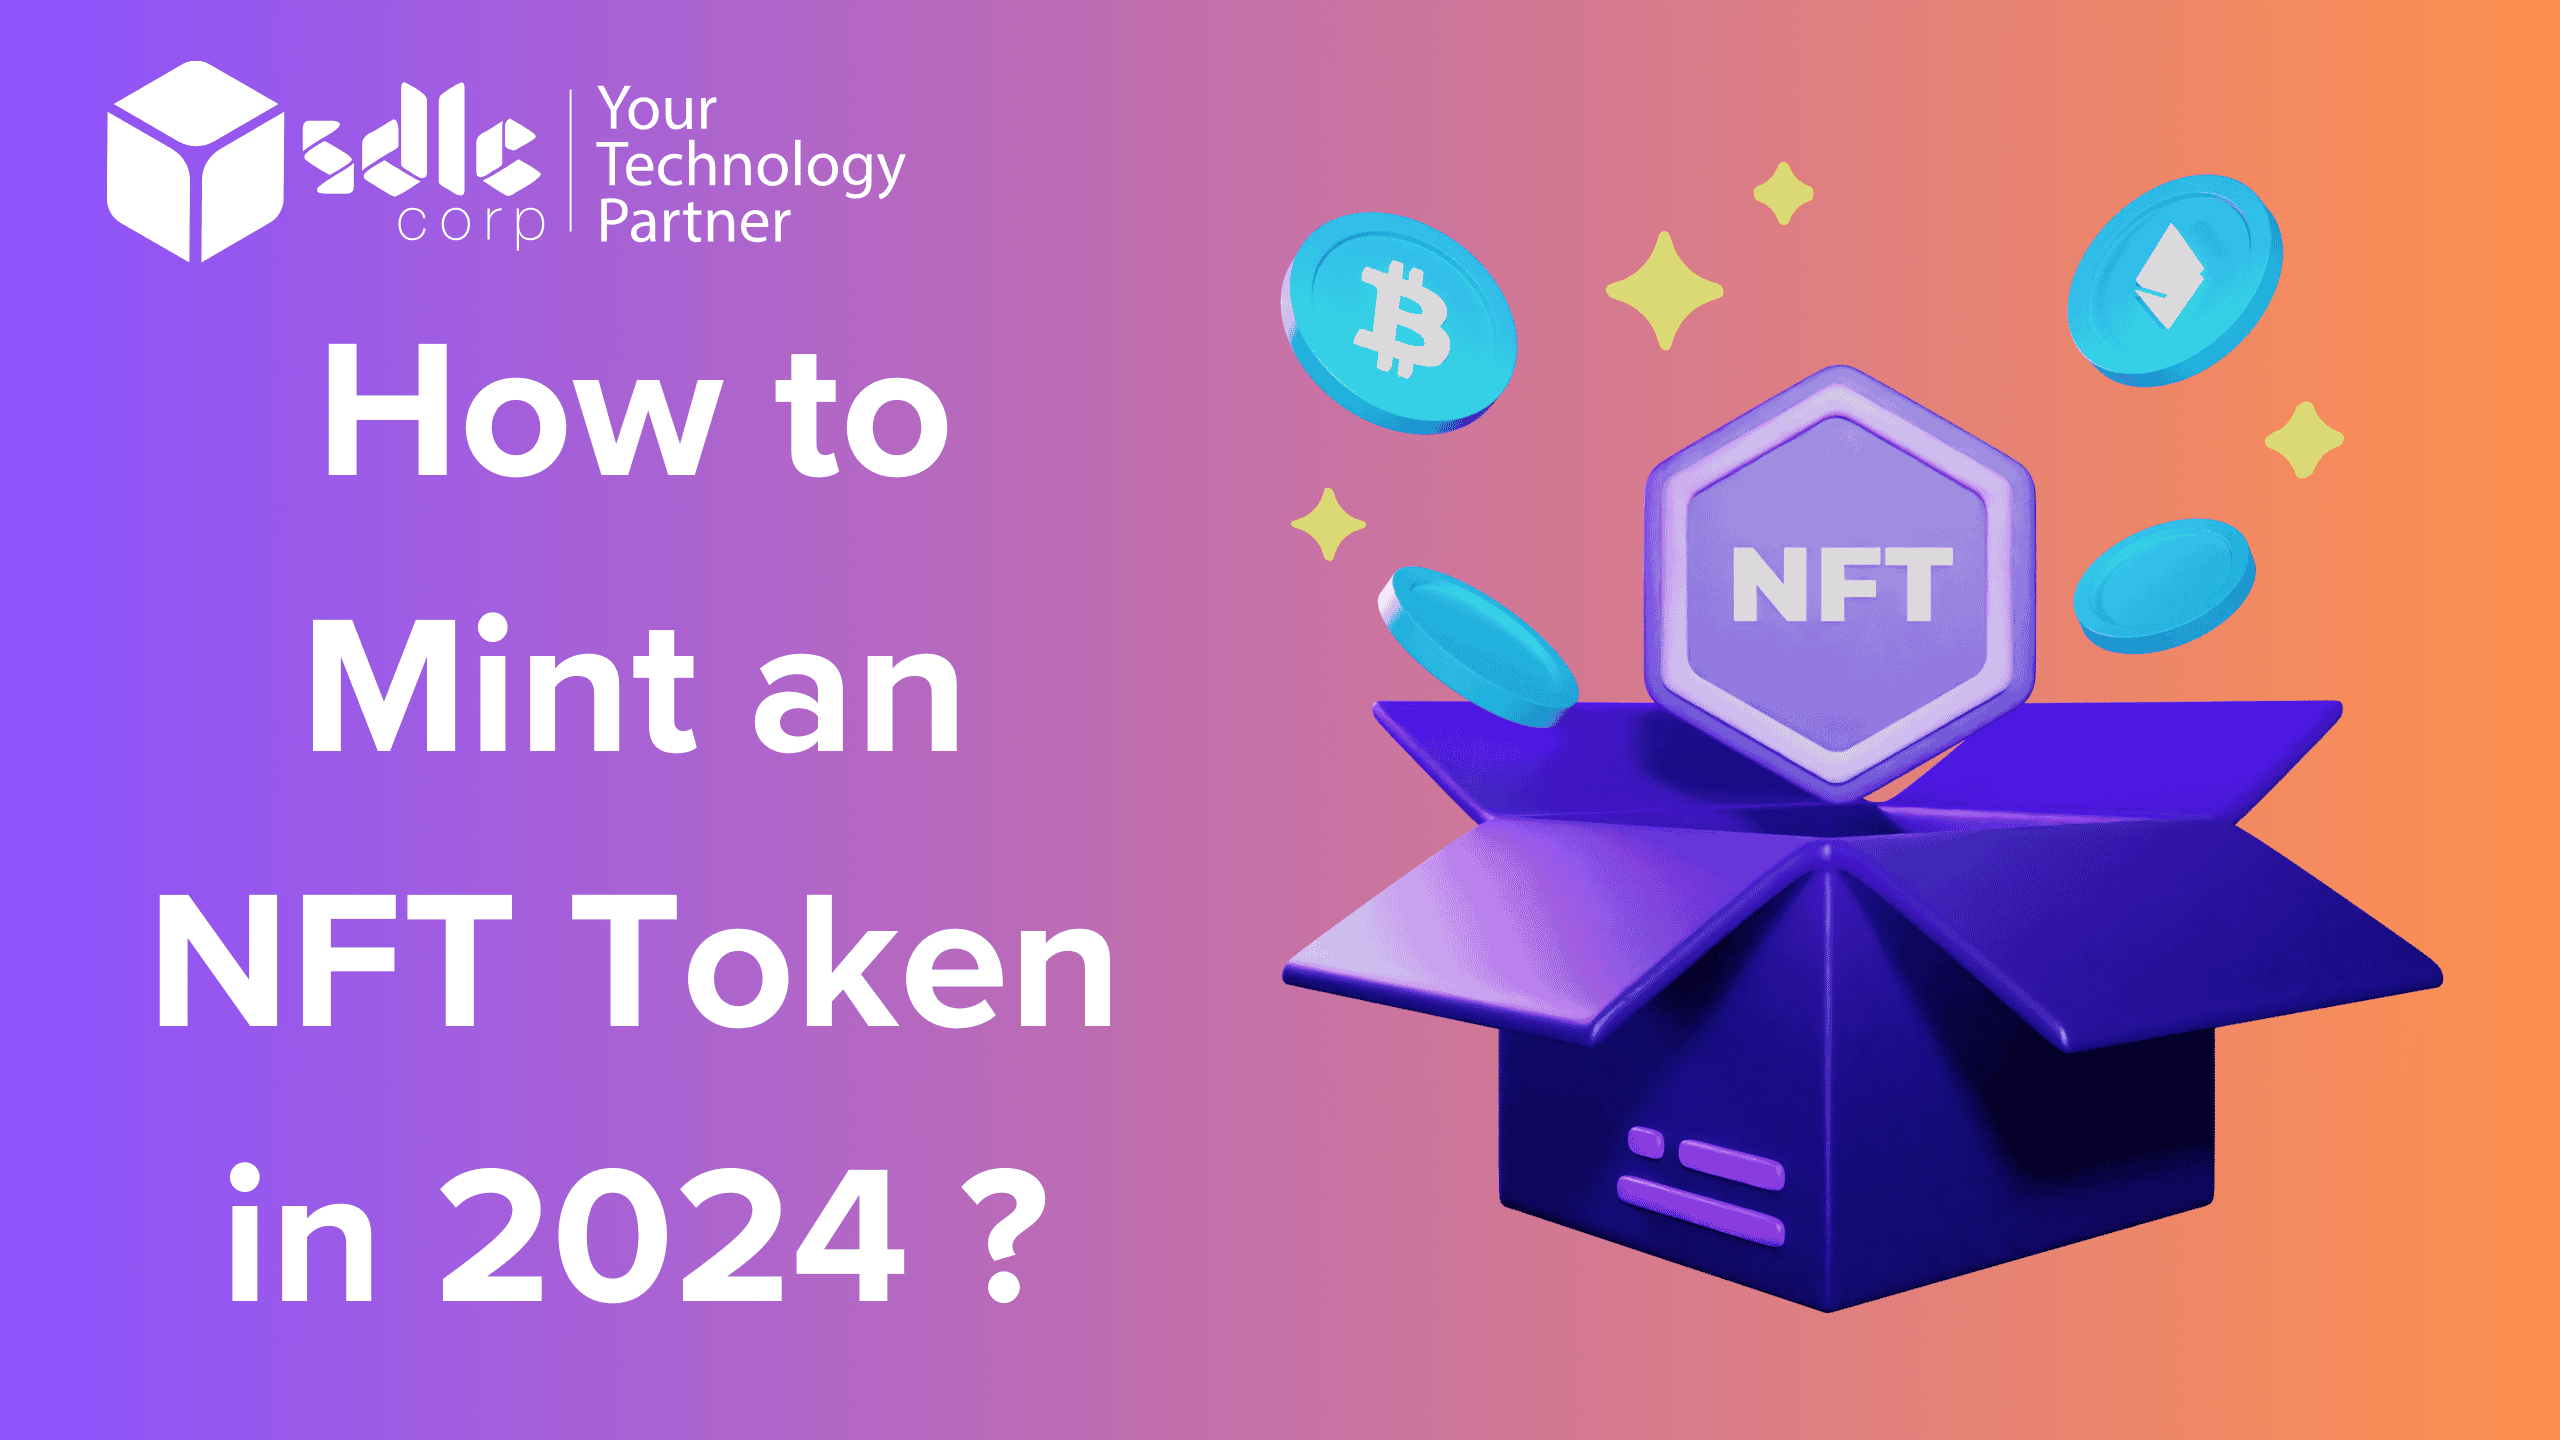 How to Mint an NFT Token in 2024